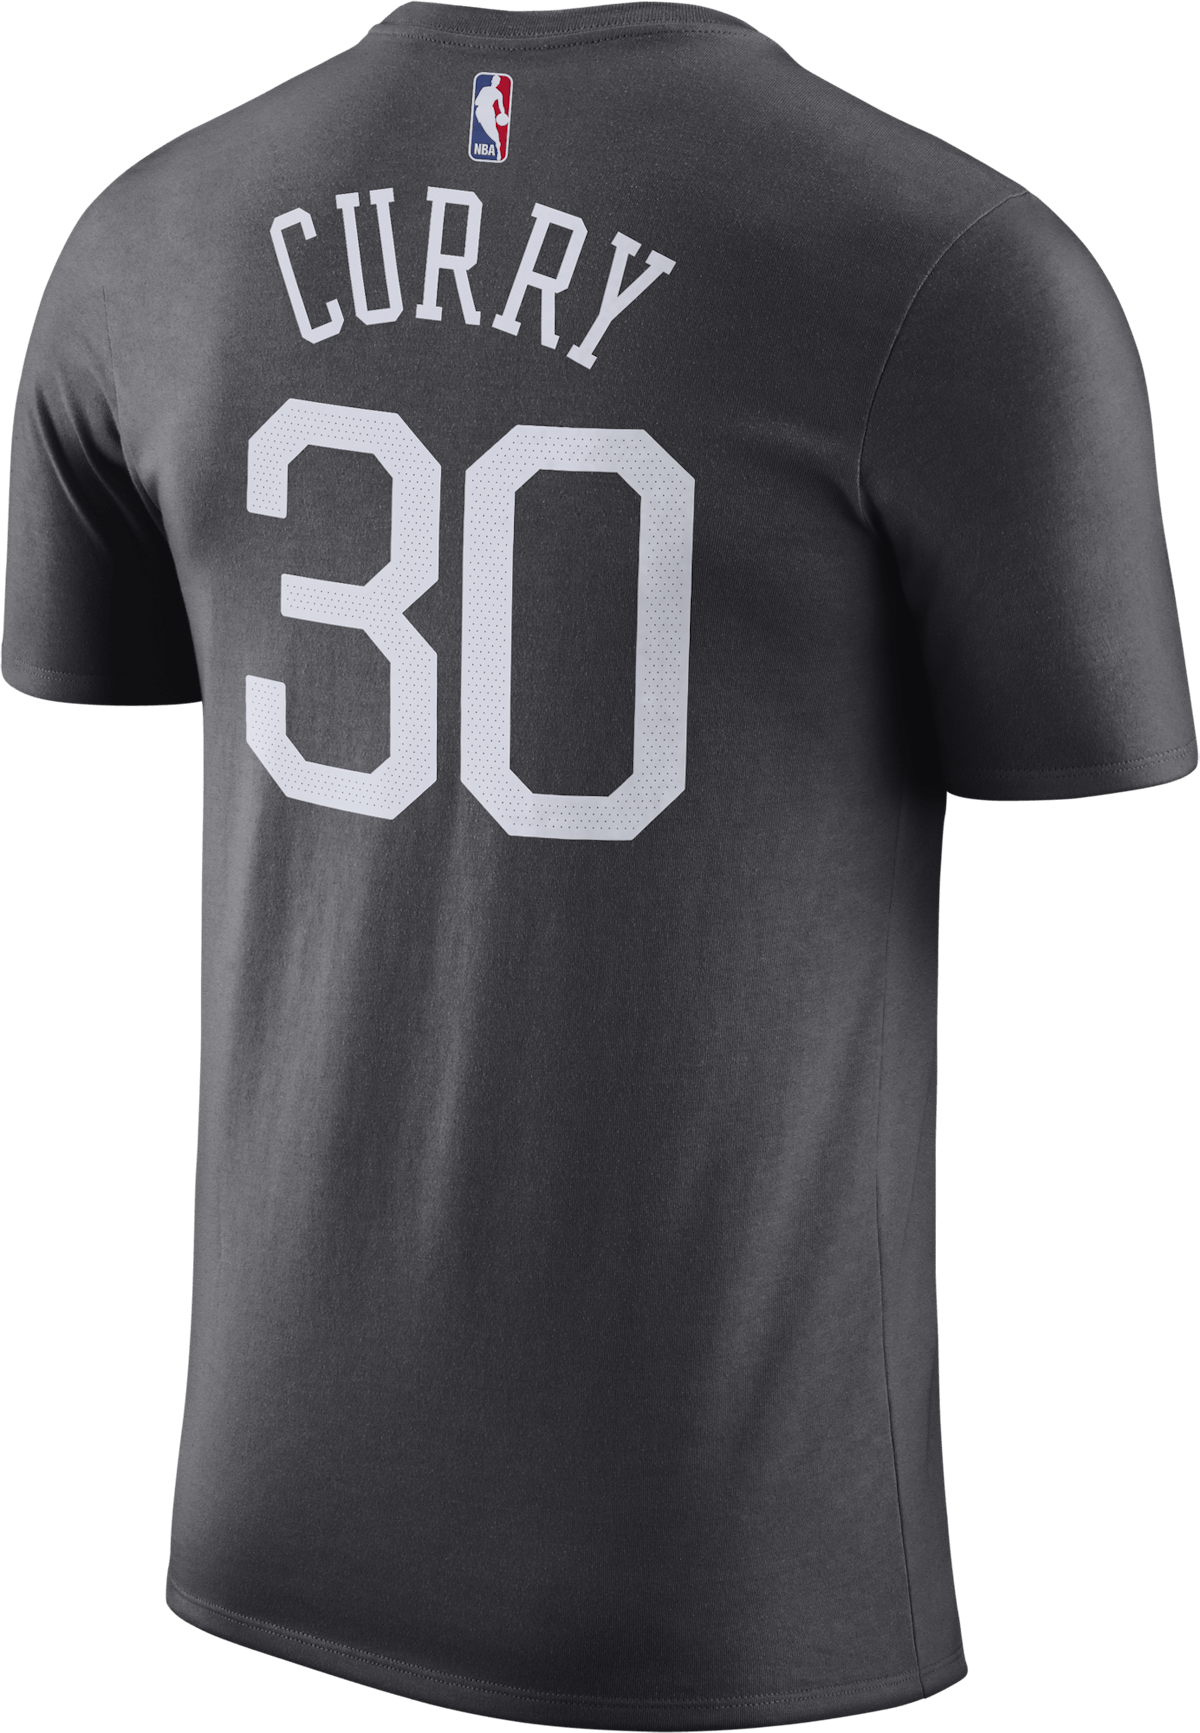 Warriors Dry Tee Curry Anthracite